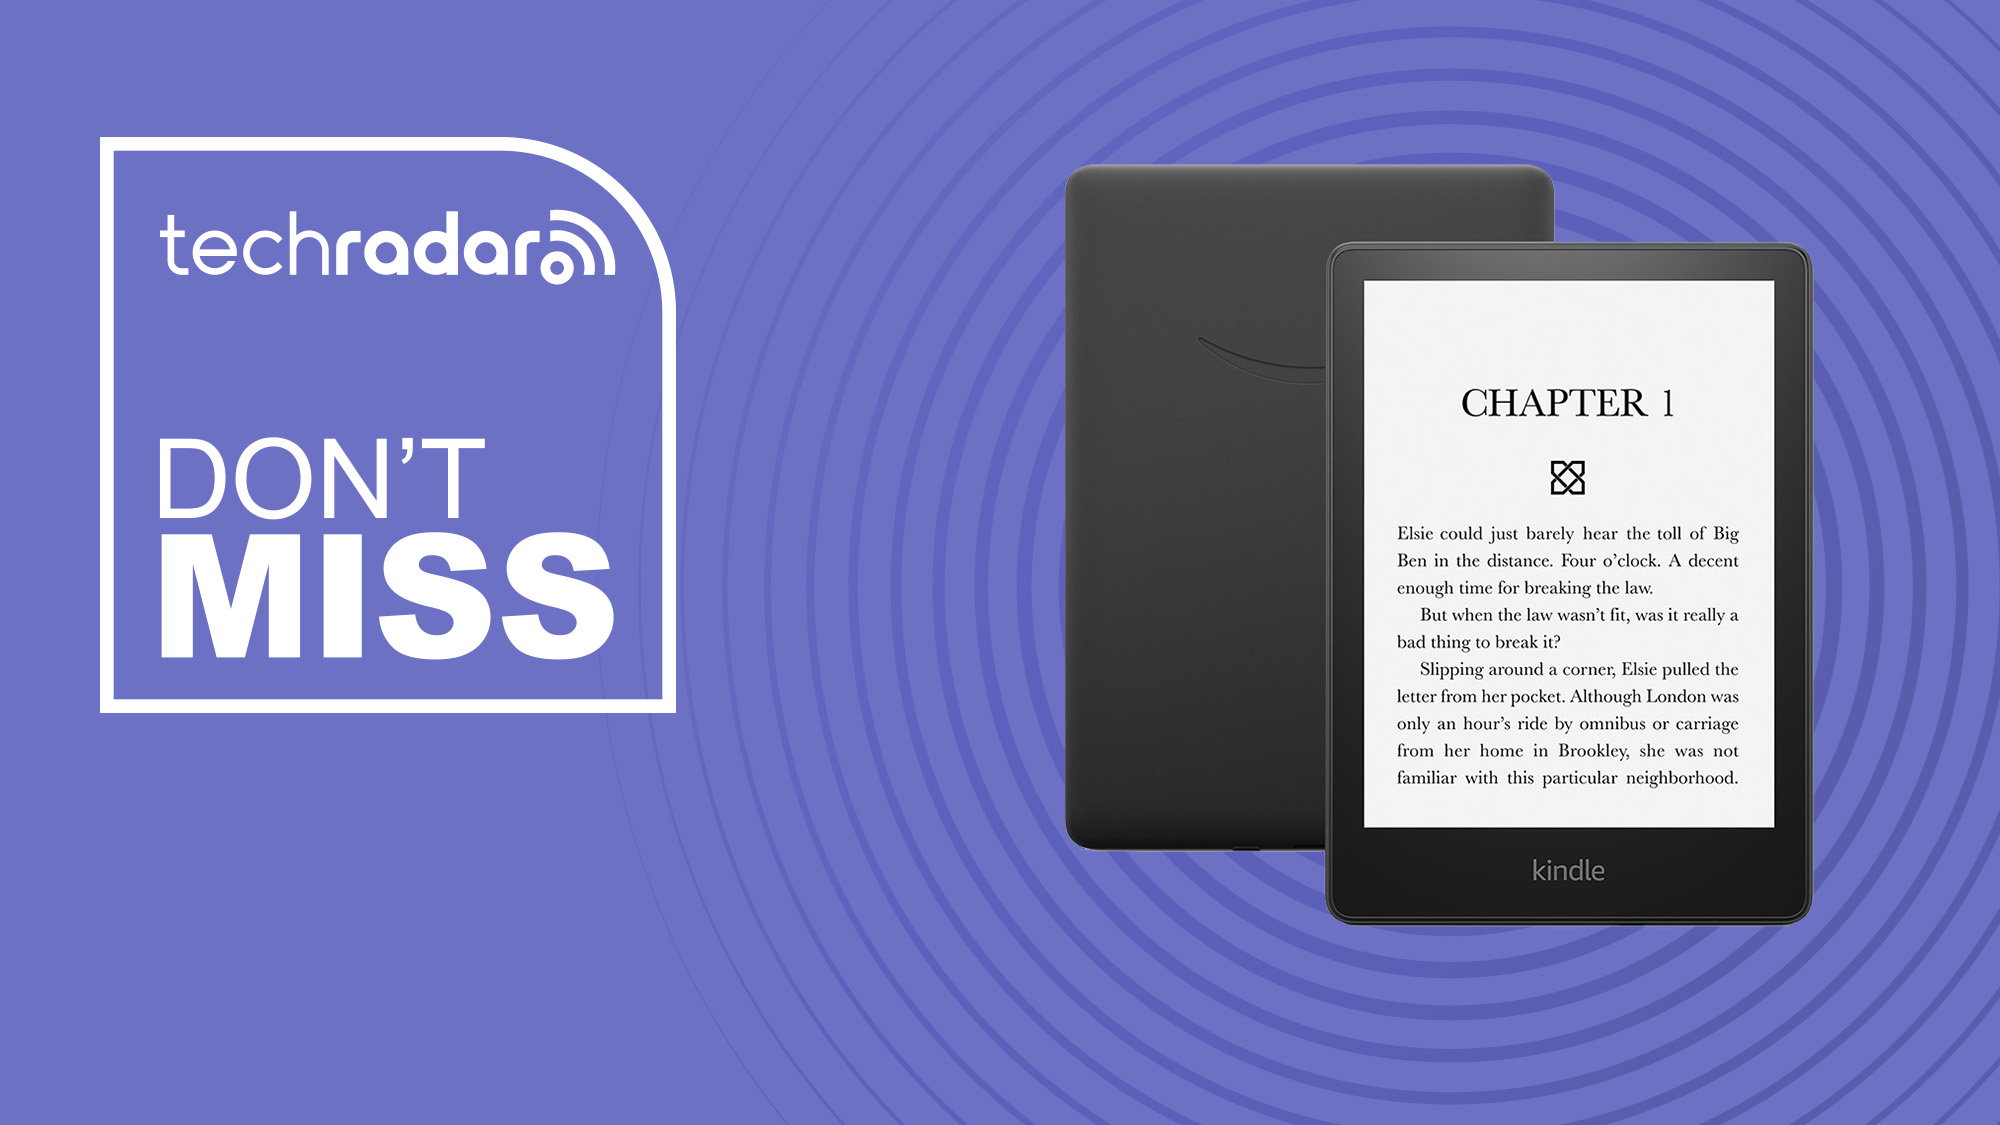 Kindle Oasis vs. Kindle Paperwhite: don't buy the wrong one